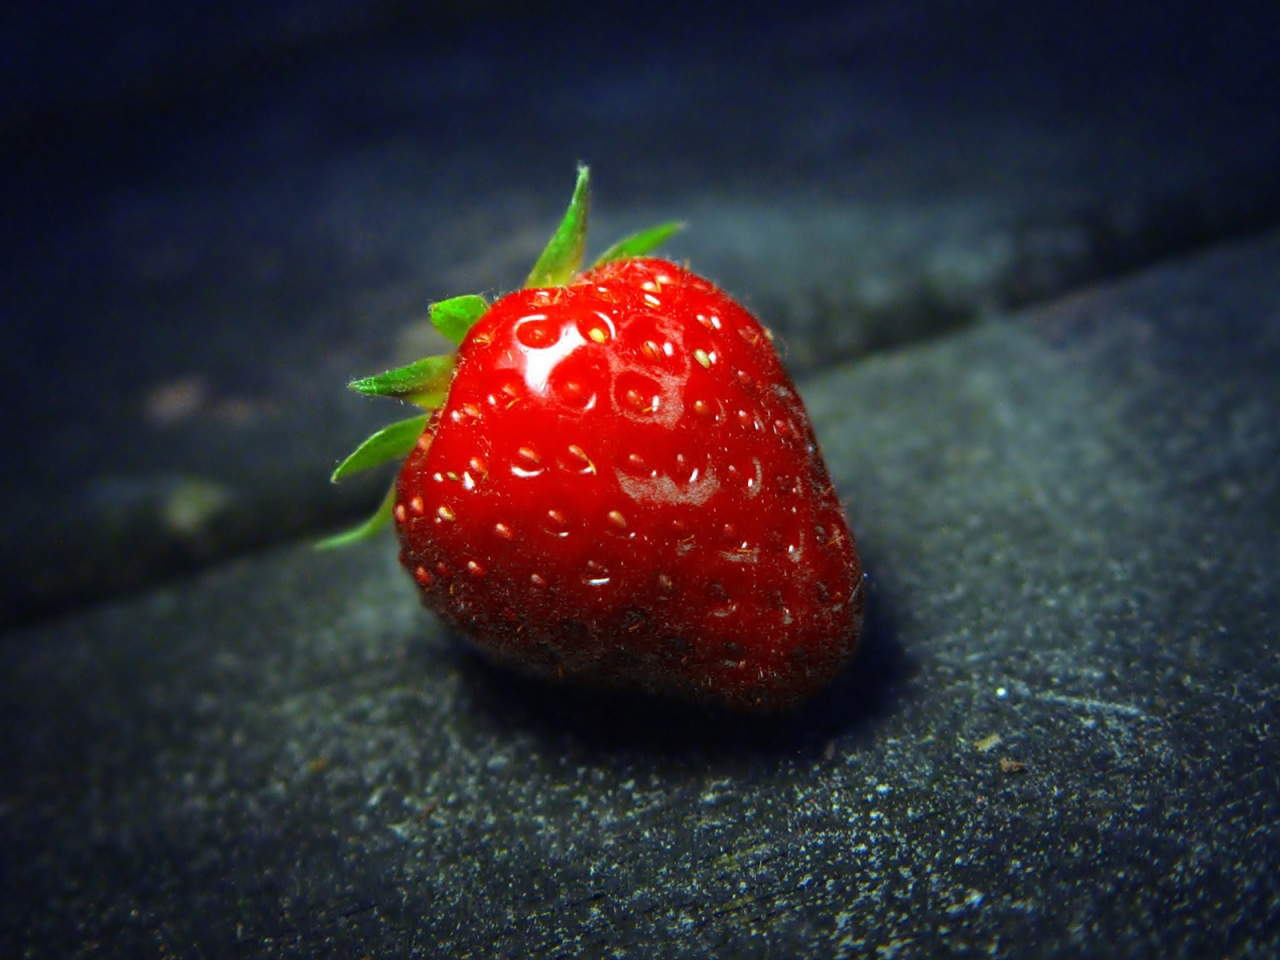 The Strawberry for 1280 x 960 resolution